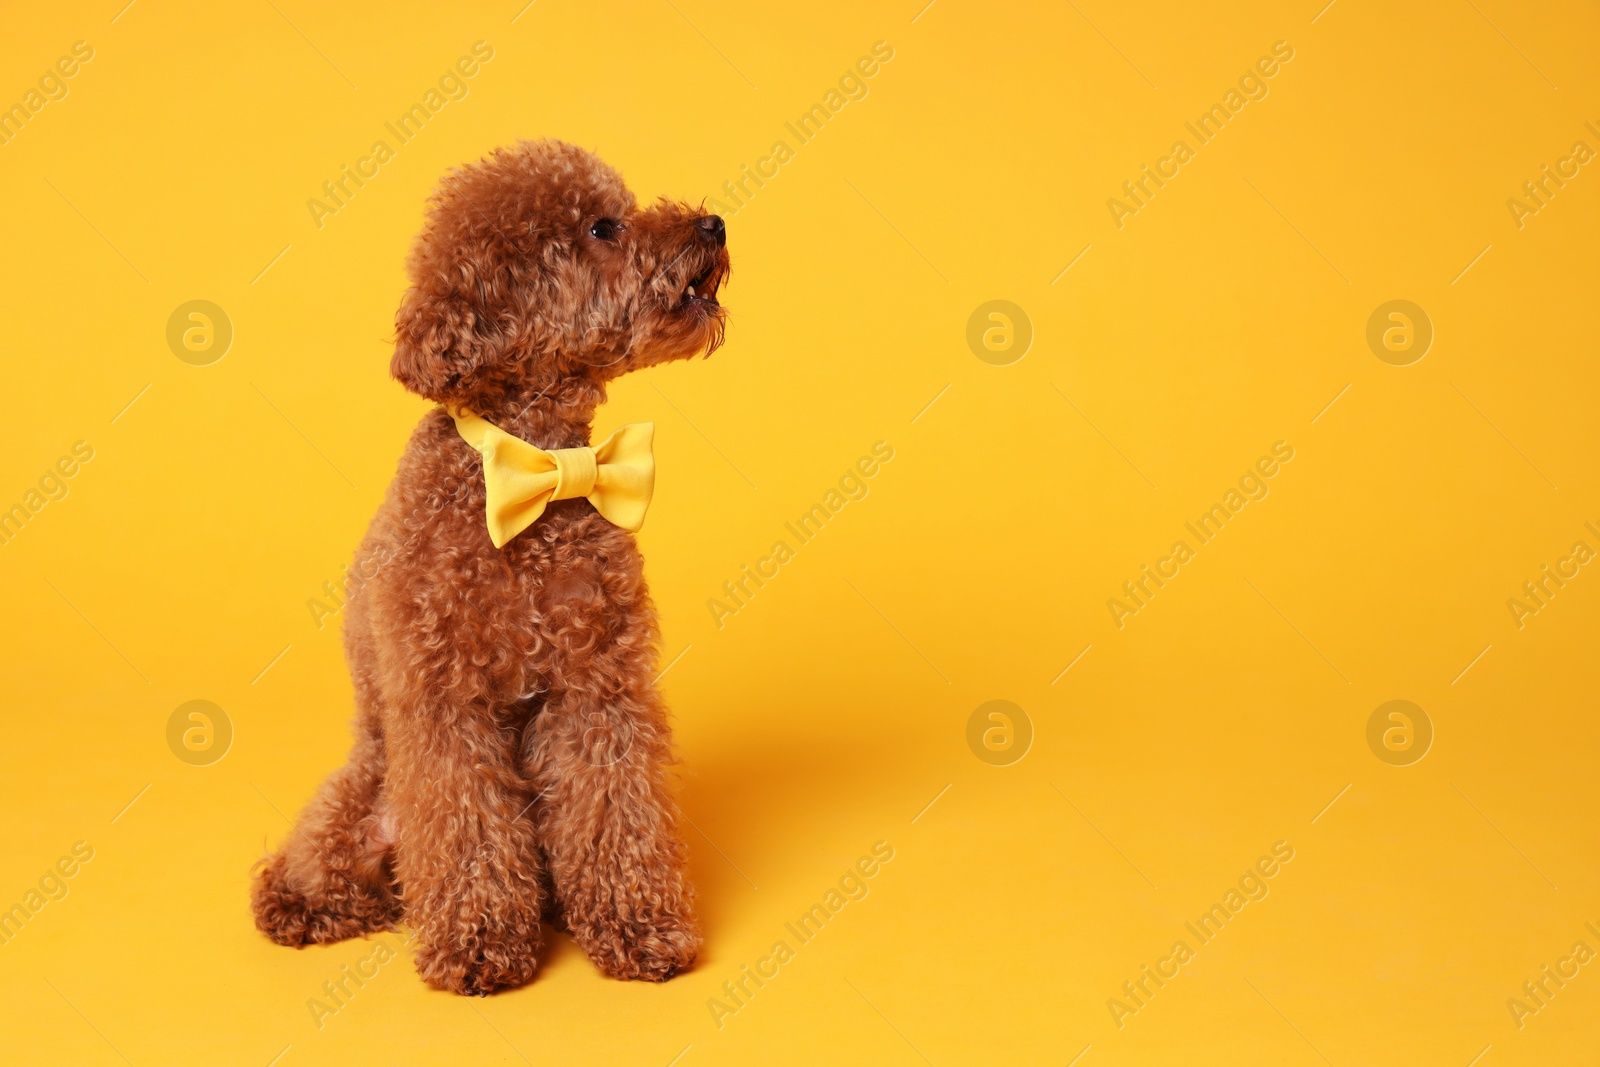 Photo of Cute Maltipoo dog with yellow bow tie on neck against orange background. Space for text